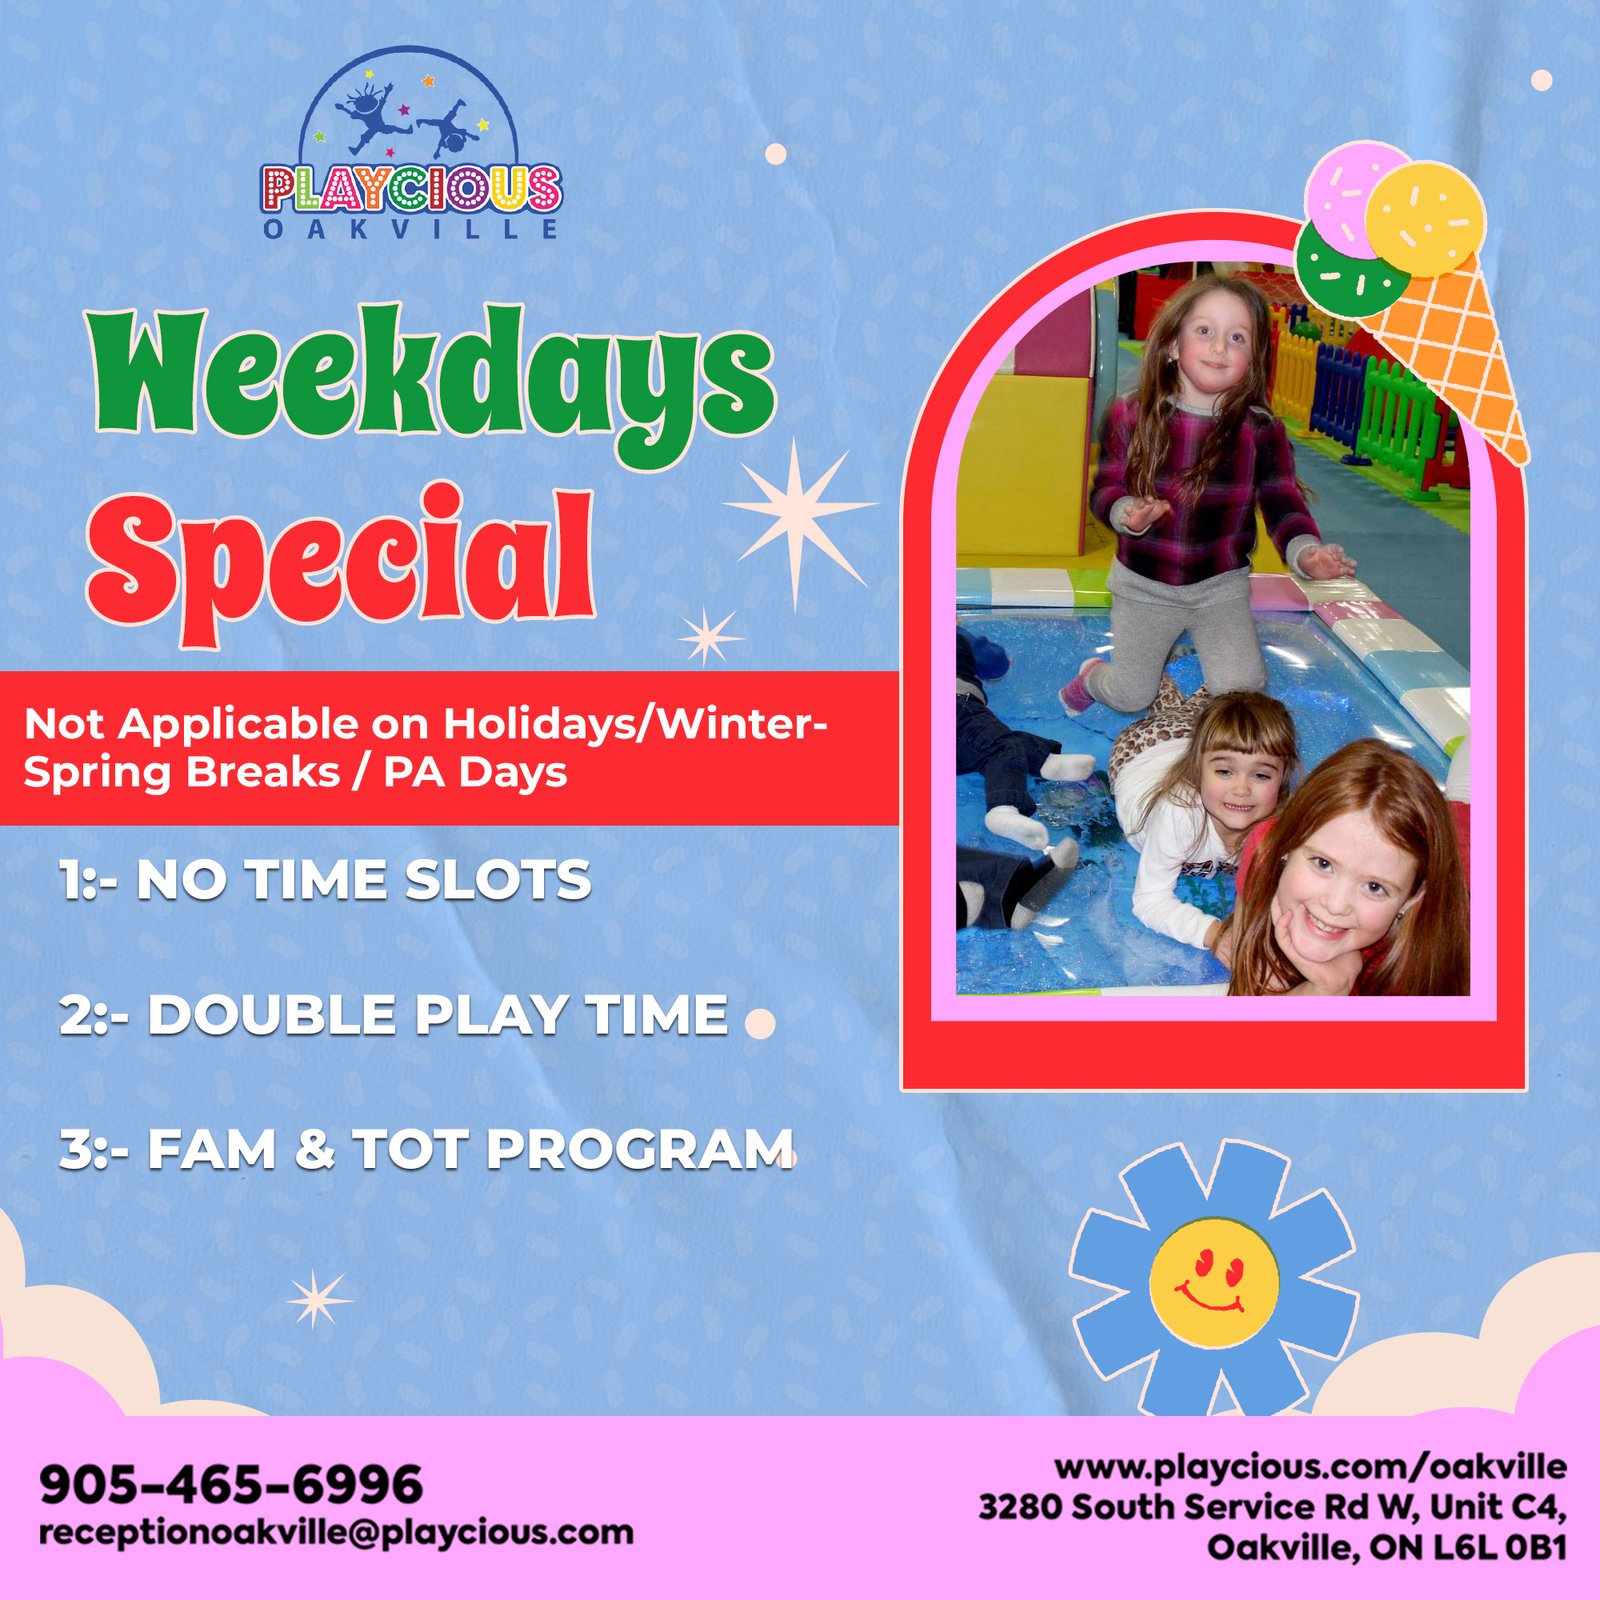 Weekdays Special
Not Applicable on Holidays/Winter-Springs Breaks/PA Day
1:- NO TIME SLOTS
2:- DOUBLE PLAY TIME
3:- FAM & TOT PROGRAM

Call for info: 905-456-6996
Or visit:
www.playcious.com/oakville
receptionoakville@playcious.com
3280 South Service Rd w, Unit C4, Oakville

#playcious #oakville #timetoplay #sanitize #marchcamp #party #learntodrive
#partycelebration #birthday #party #music #privateevents #events #weddings
#kidsparty #birthdayparty #party #kidspartyideas #birthday #partyideas